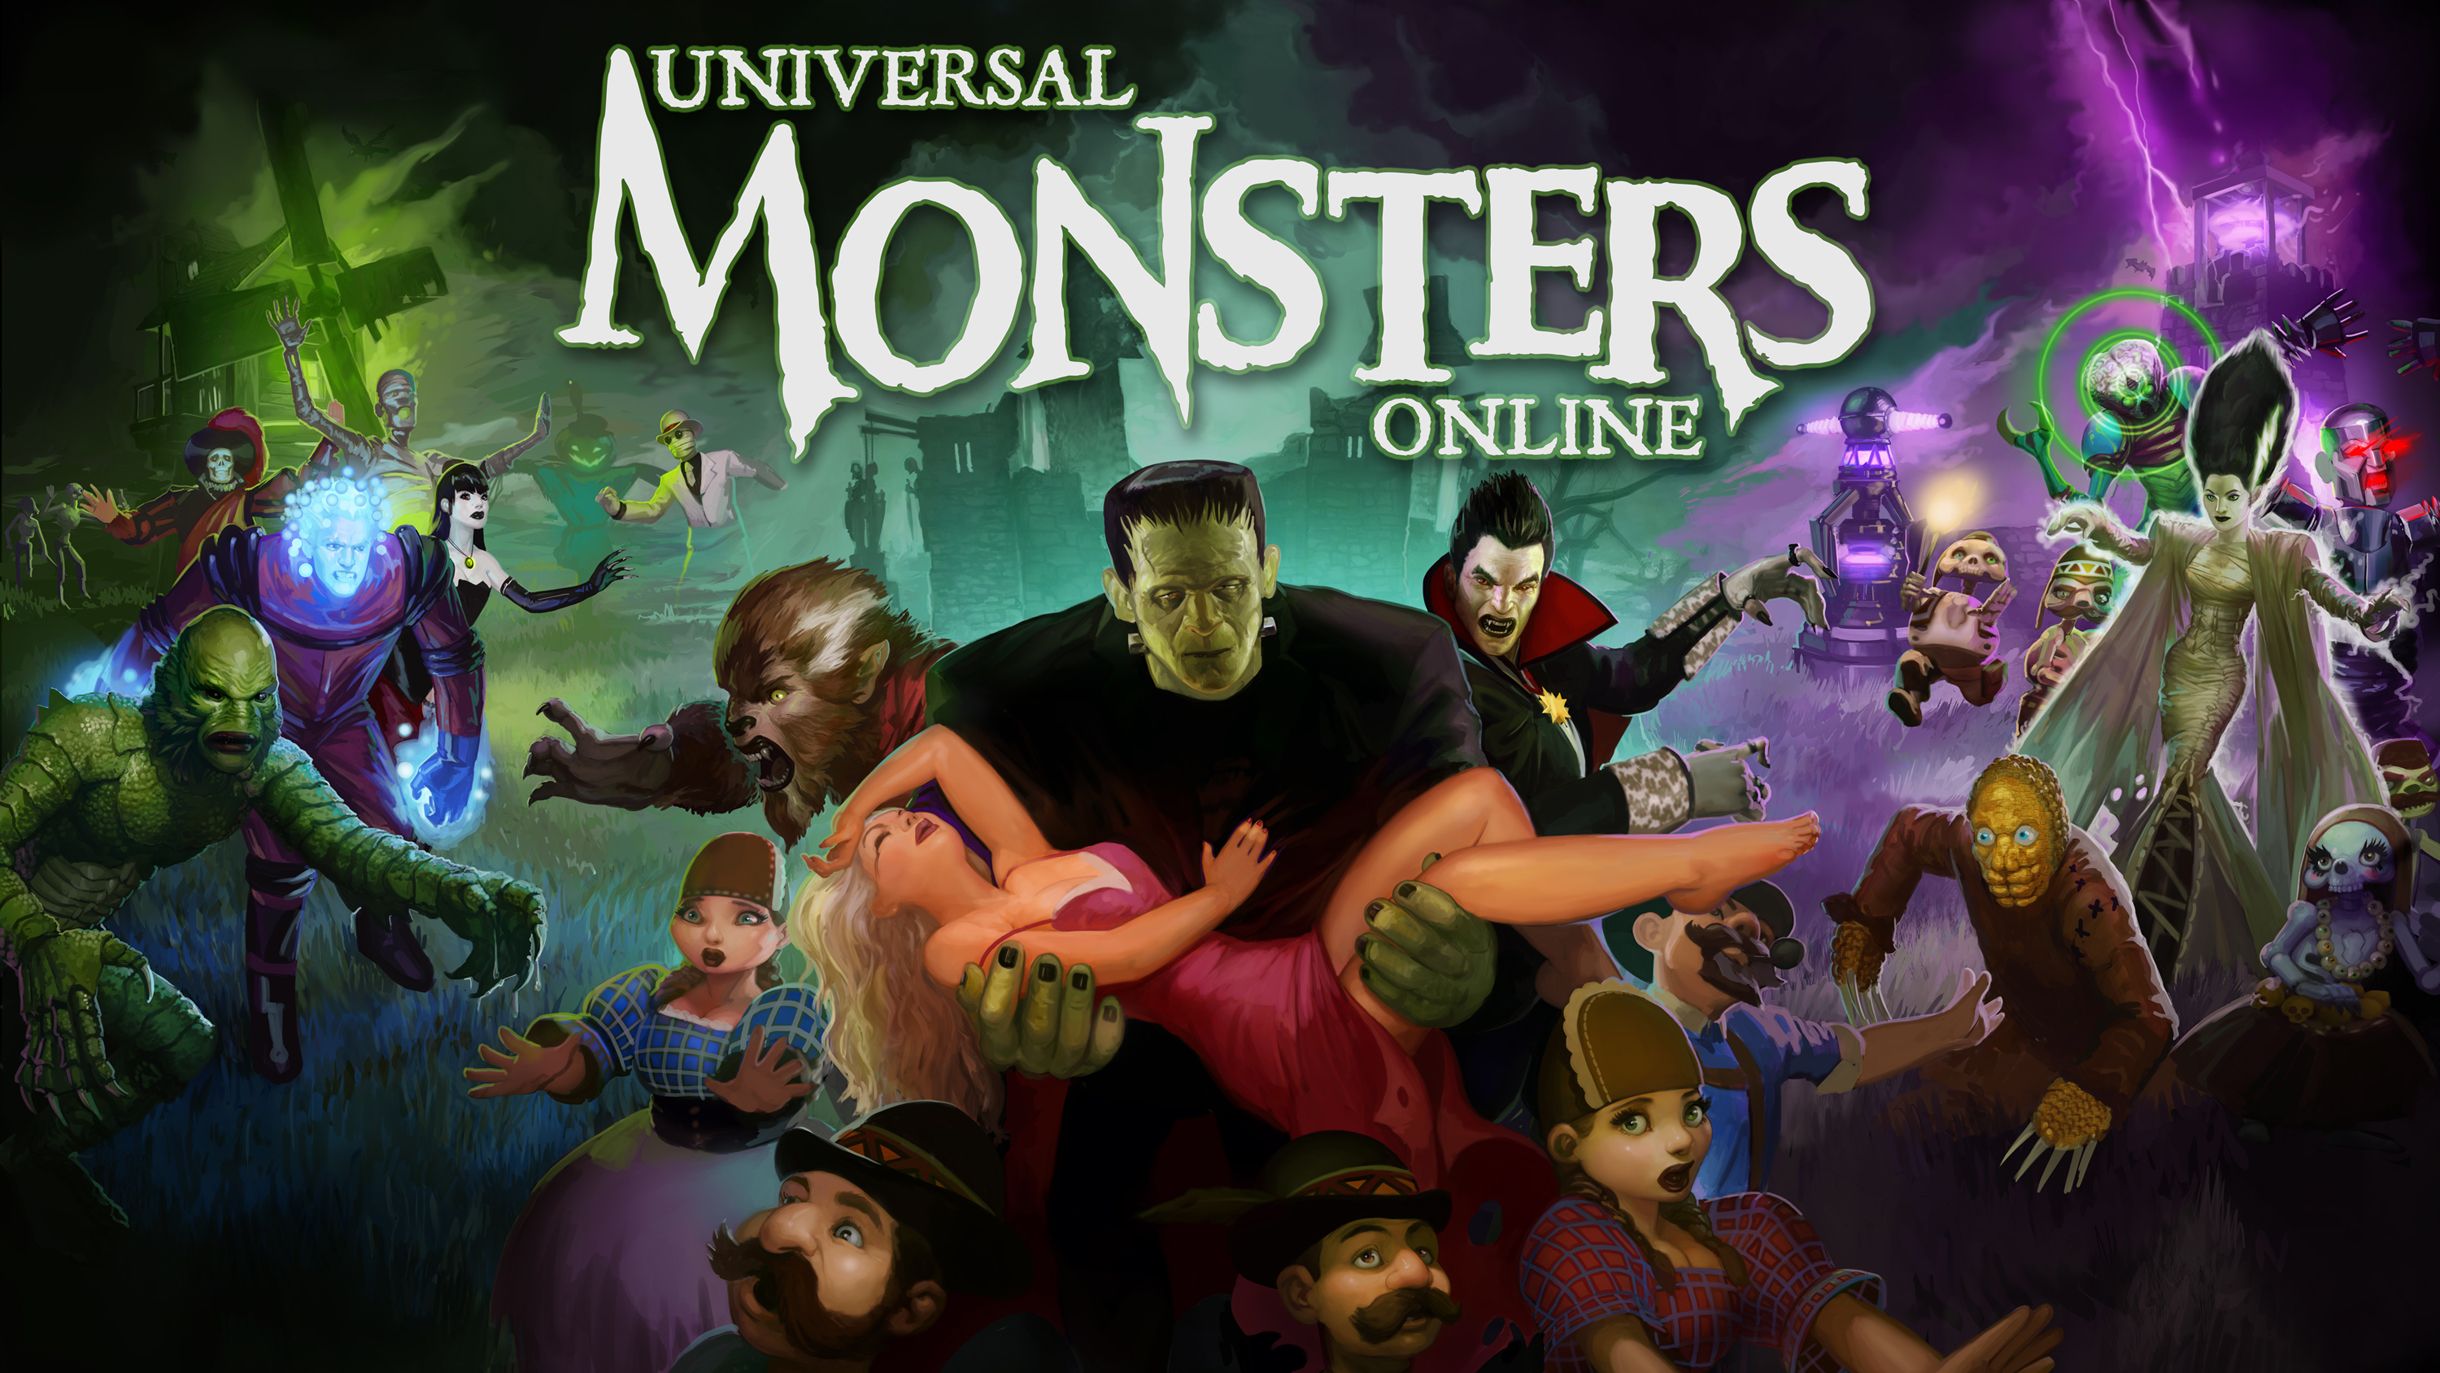 Universal Monsters screenshots, image and picture